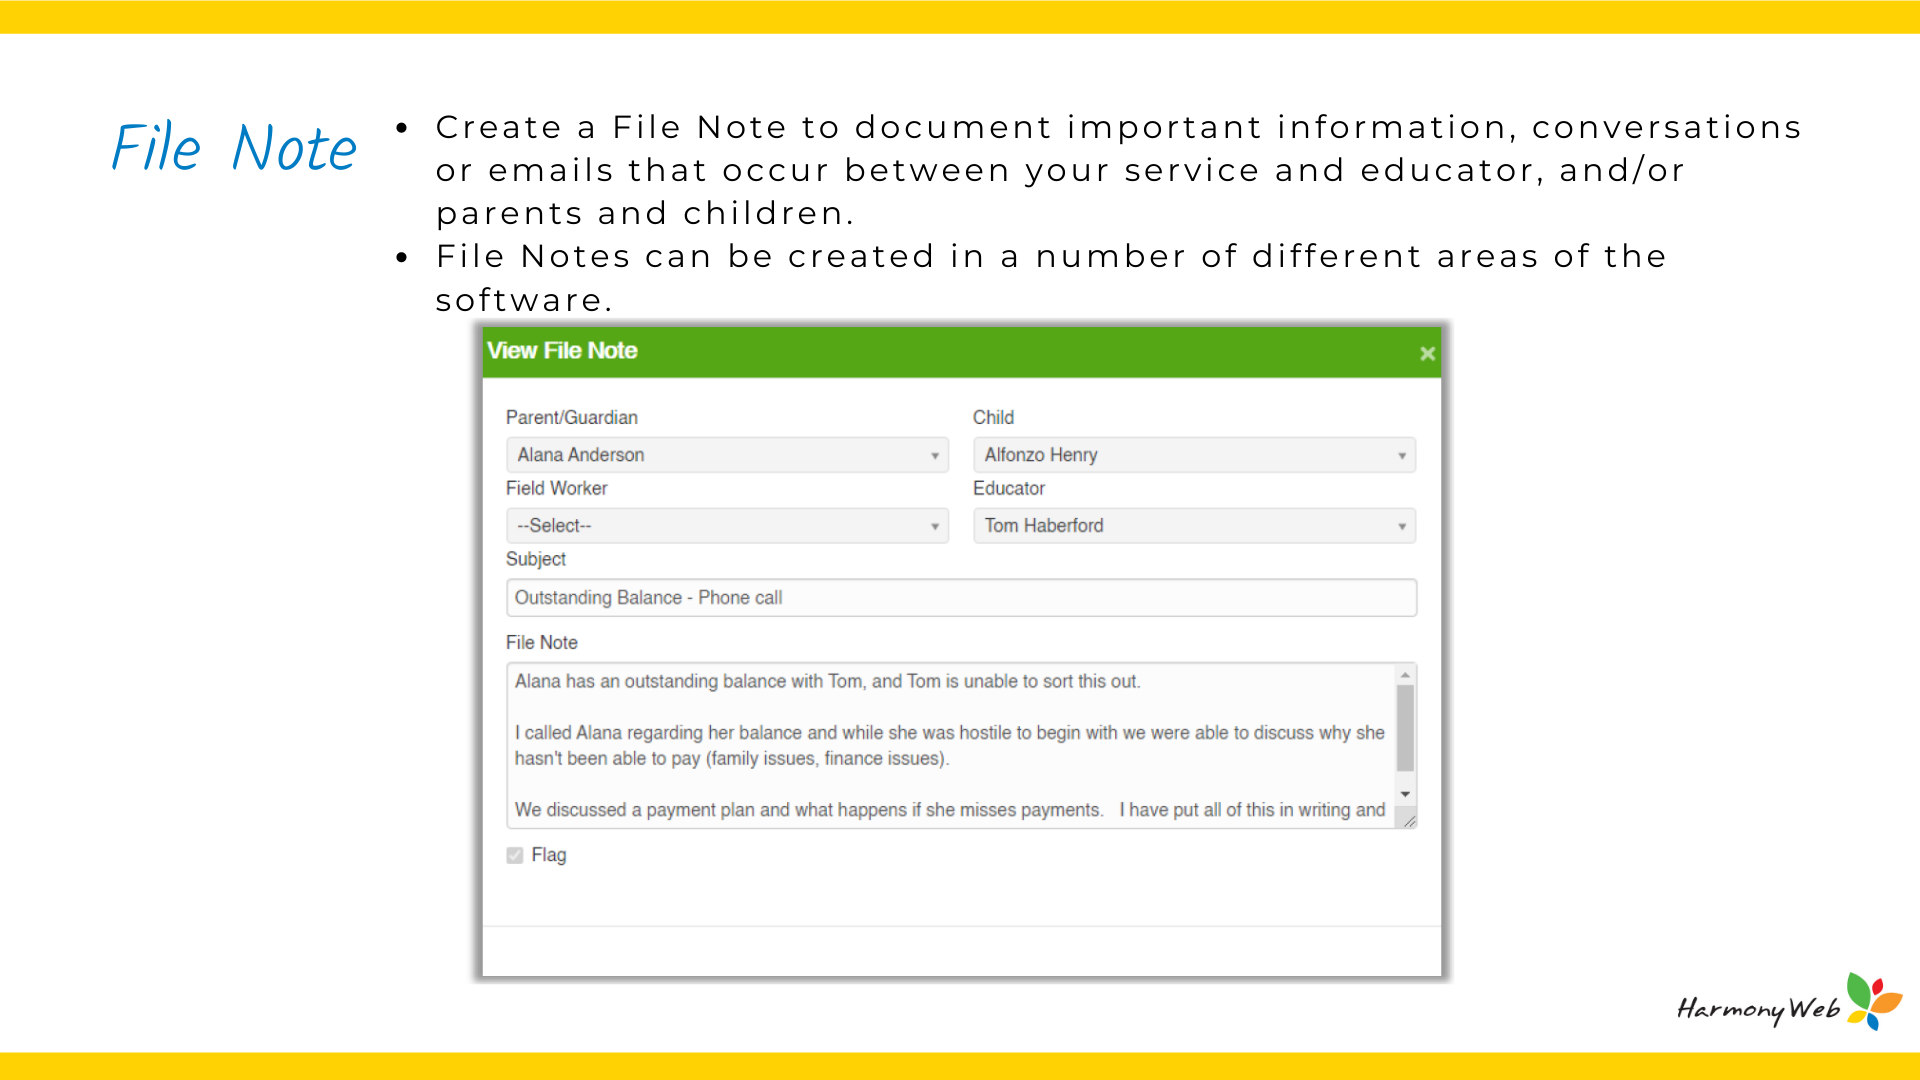 File Notes can be included easily